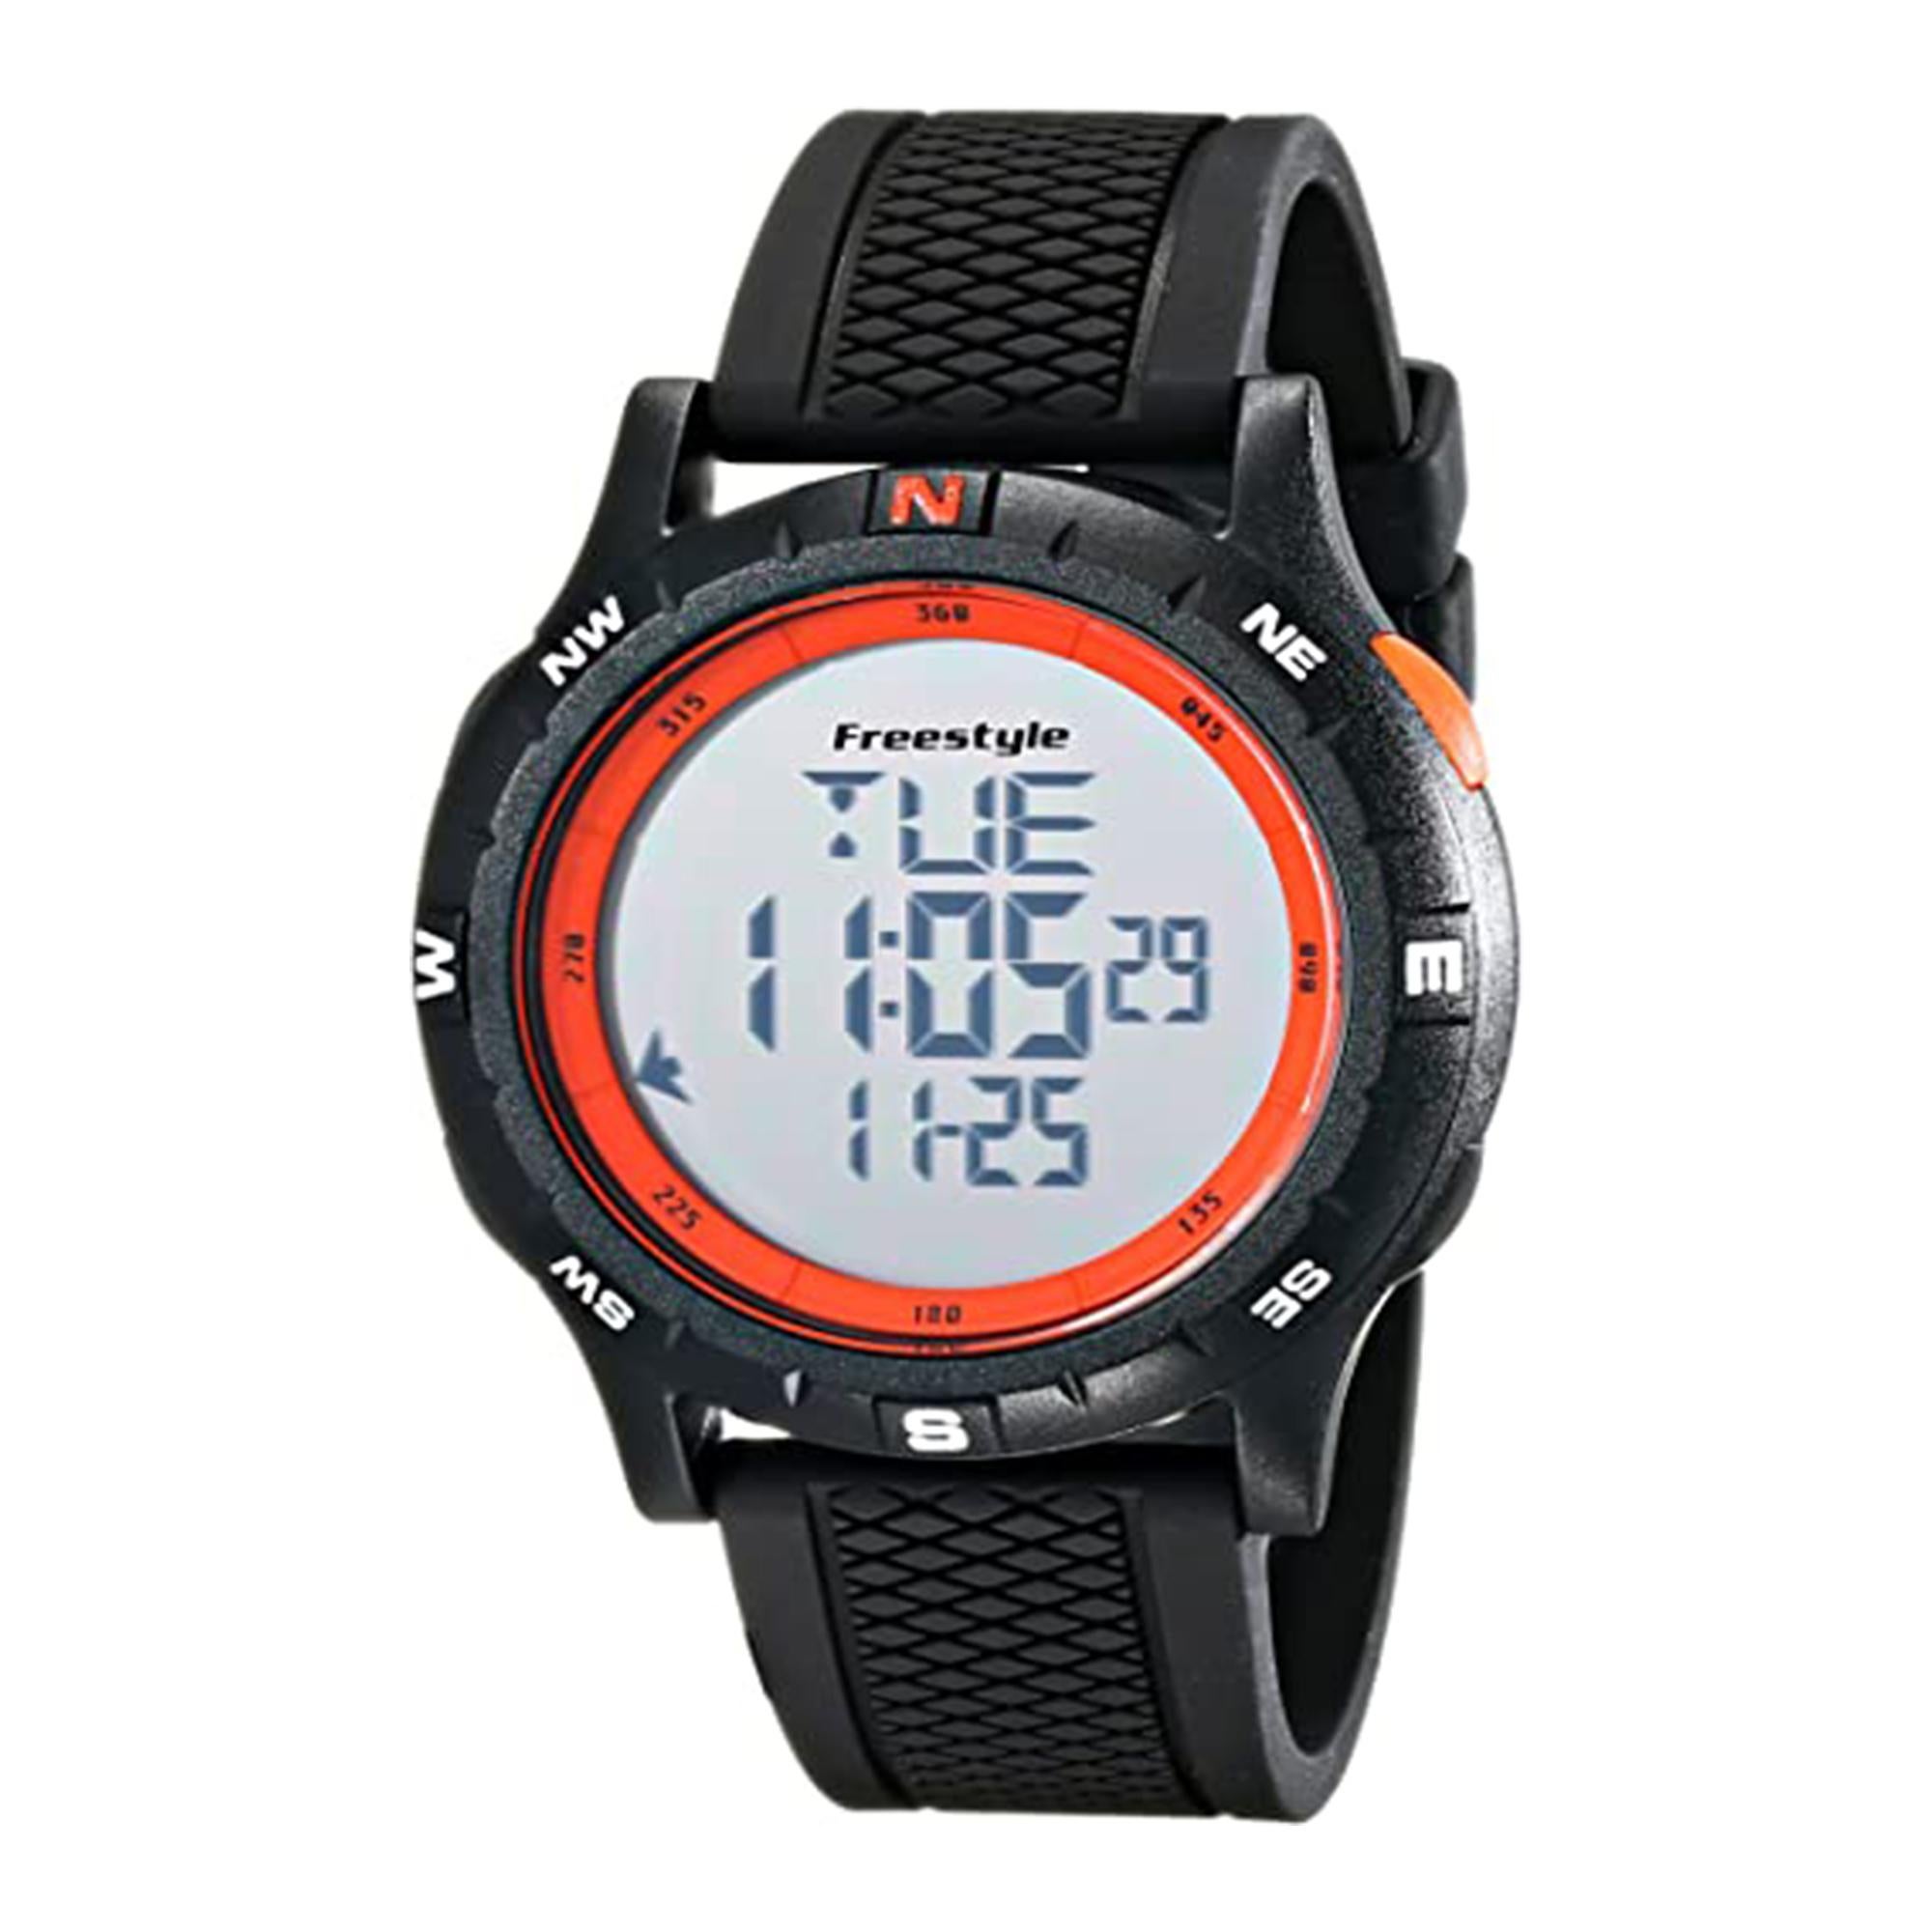 This Freestyle Navigator has quartz digital movement with custom digital compass and Standard Digital Functions (day/time/date, dual time, alarms, countdown heat timer, chronograph and night vision backlight, polyurethane strap with stainless steel